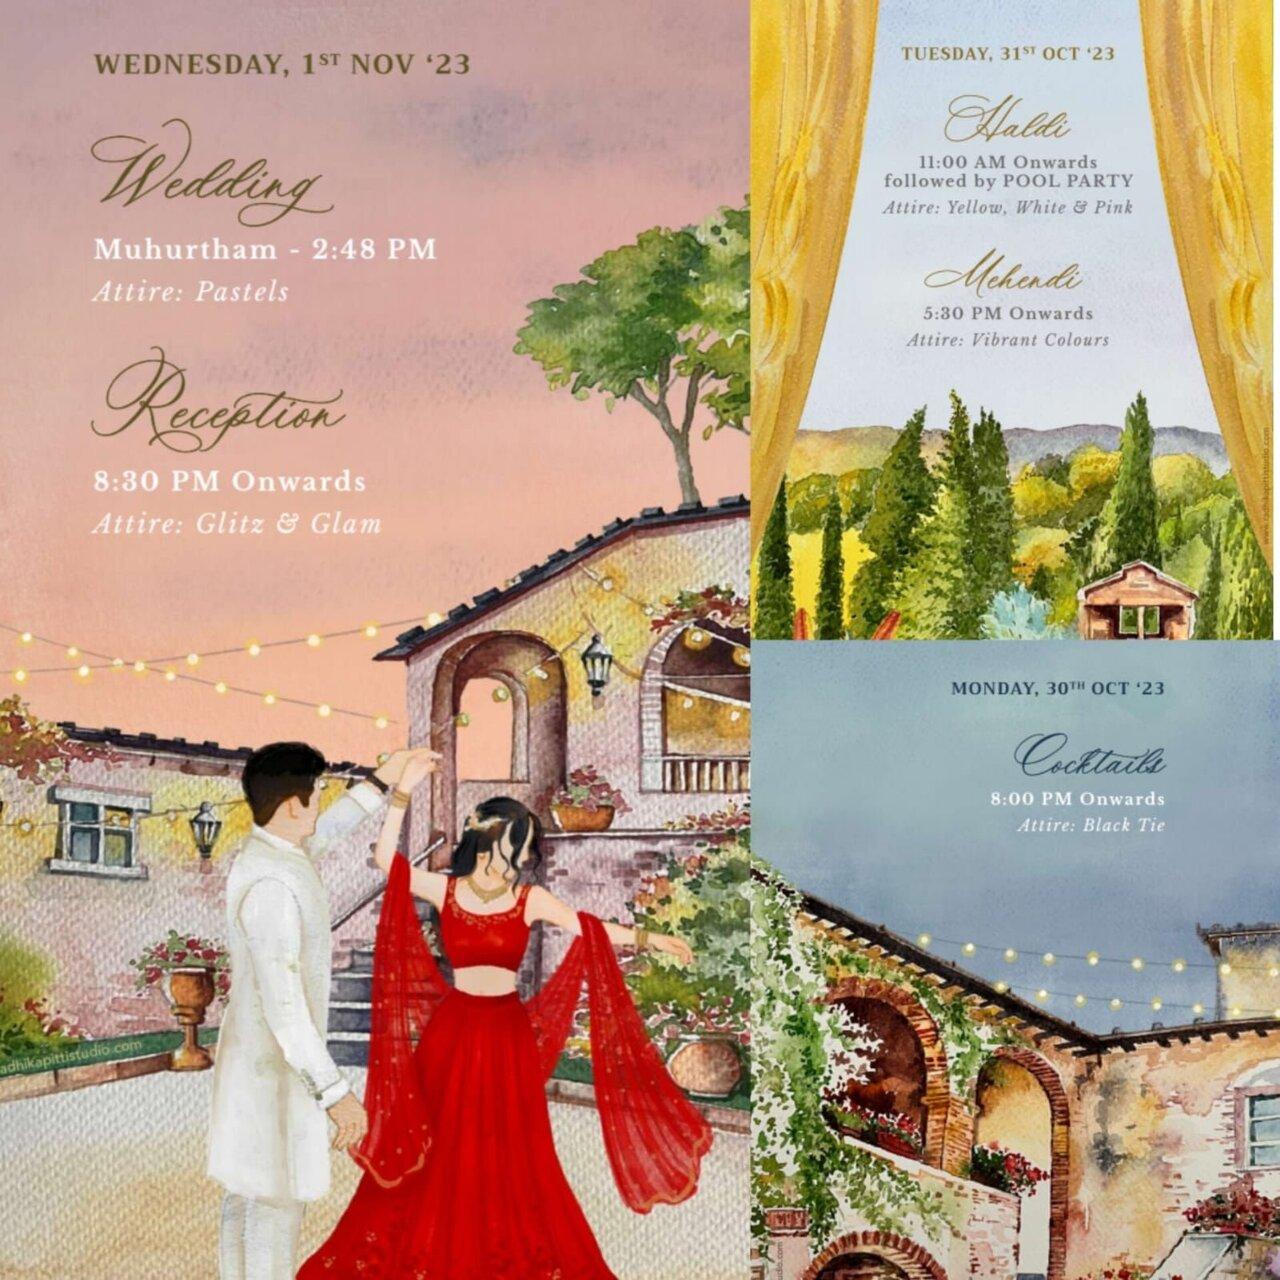 The three-day wedding celebration commenced on Monday. Picture of their wedding invite and schedule is doing the rounds on social media.
30th Oct: Cocktails 31st Oct: Haldi, Mehendi1st Nov: Wedding, Reception